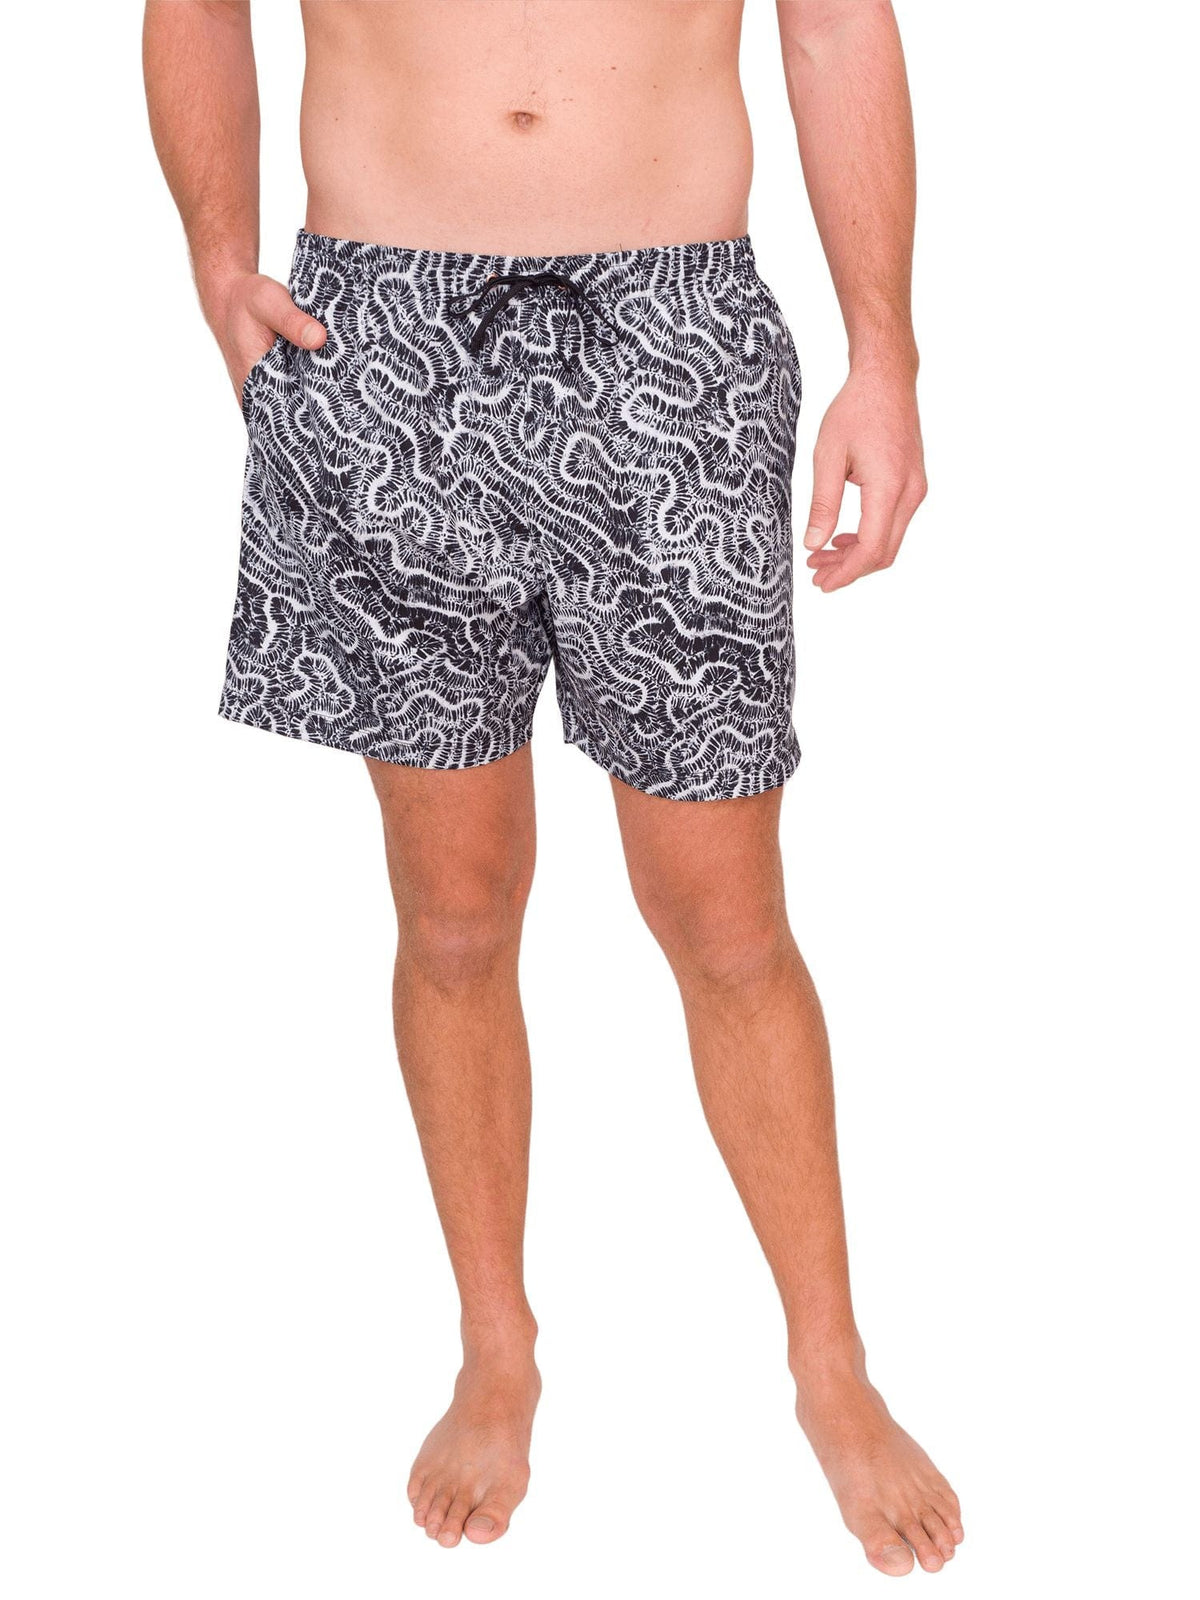 Model: Dalton is a coral biologist who studies the relationship between communities and reef ecosystems. He is 6&#39;3&quot;, 200lbs, and is wearing a size XL. 